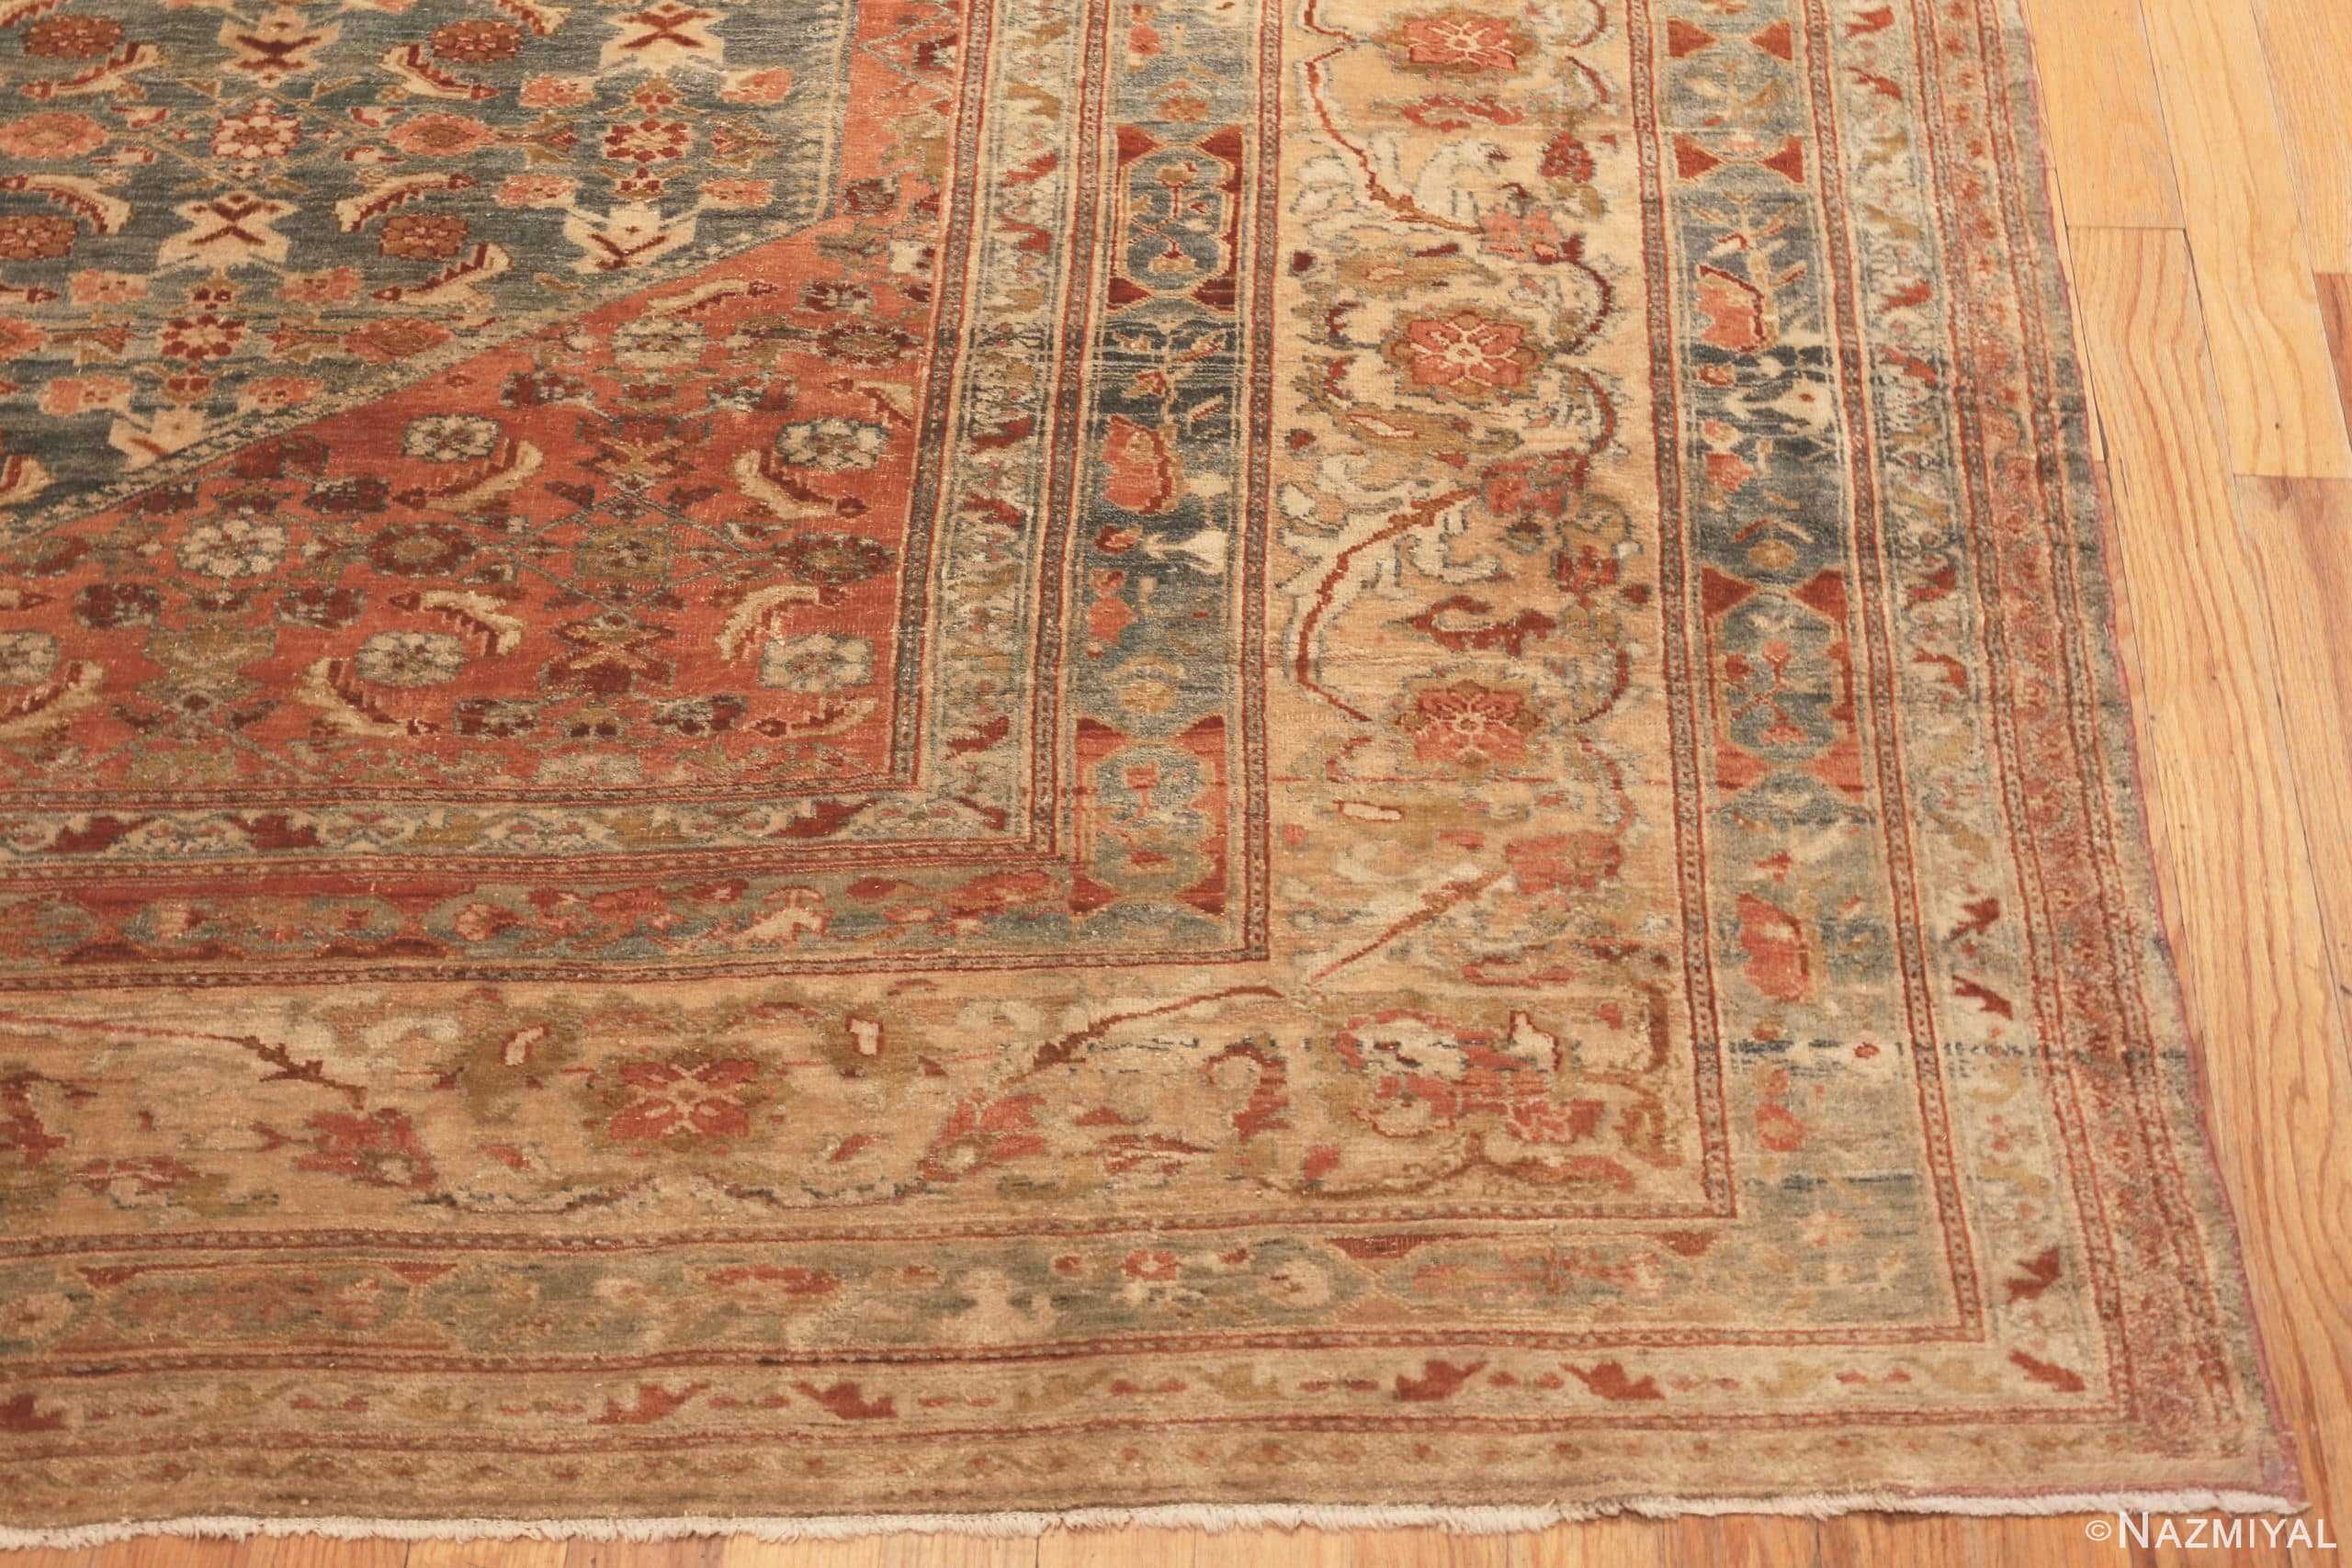 Corner Of Large Light Blue Background Antique Persian Malayer Rug 71177 by Nazmiyal Antique Rugs